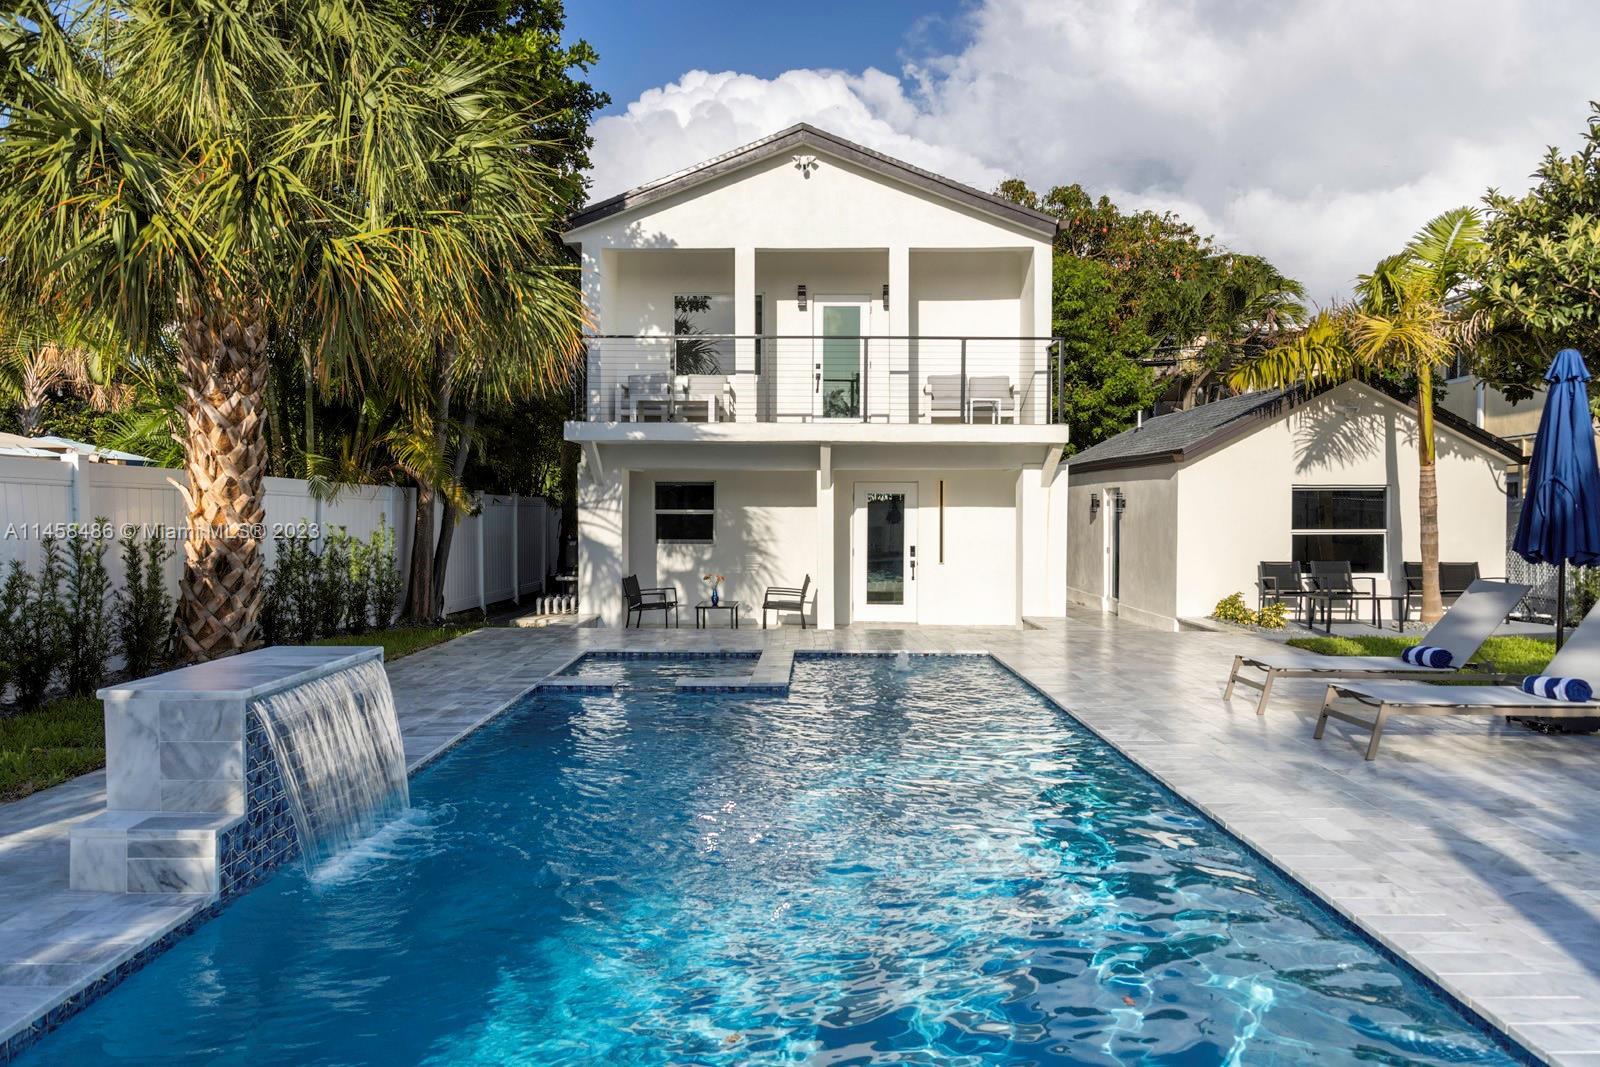 This beautiful duplex in Lauderdale-by-the-Sea offers a unique opportunity with two separate units a